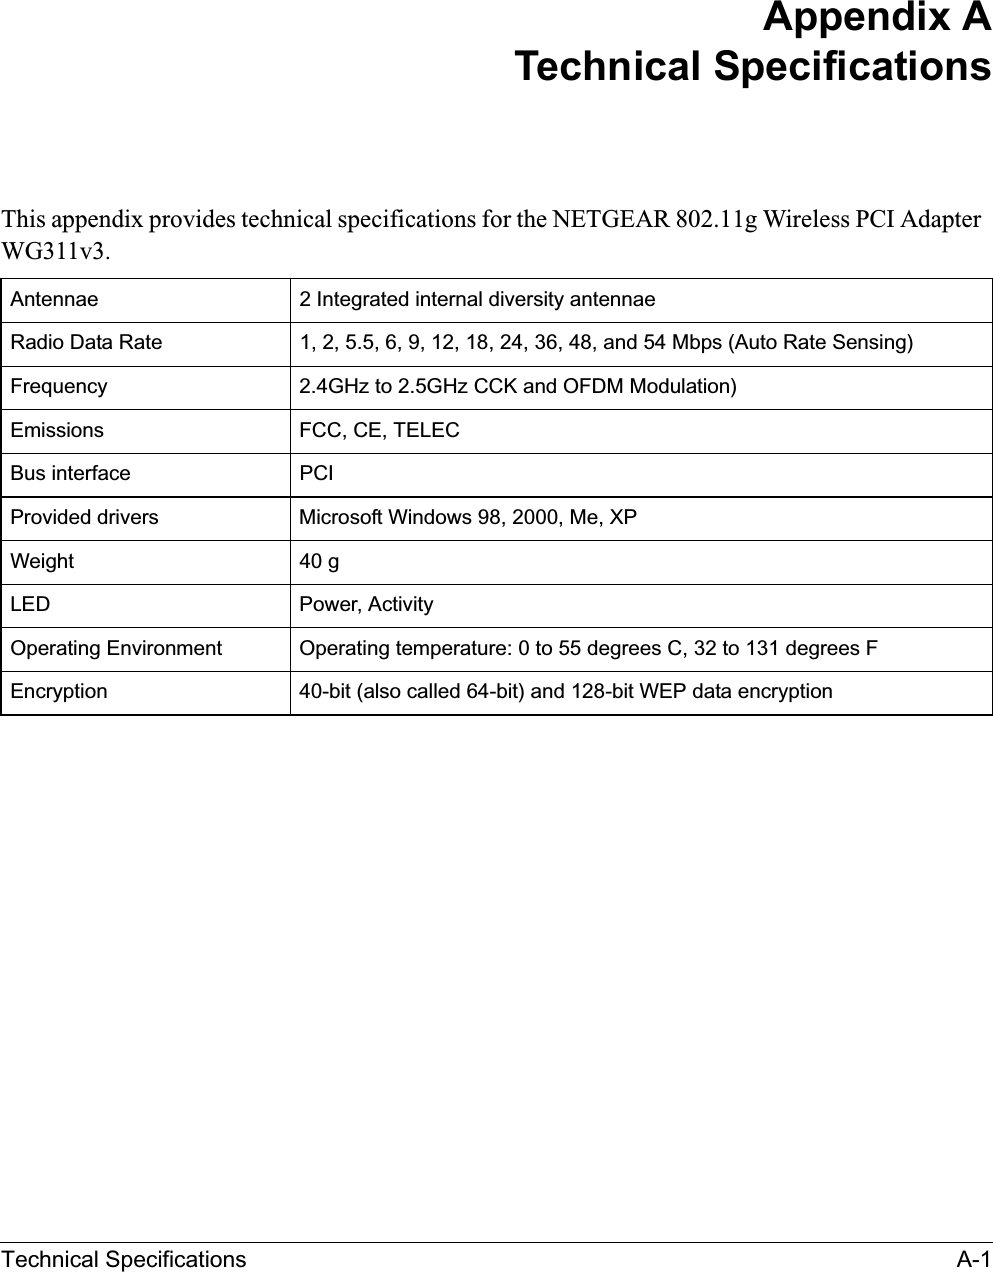 Technical Specifications A-1Appendix ATechnical SpecificationsThis appendix provides technical specifications for the NETGEAR 802.11g Wireless PCI AdapterWG311v3.Antennae 2 Integrated internal diversity antennae Radio Data Rate 1, 2, 5.5, 6, 9, 12, 18, 24, 36, 48, and 54 Mbps (Auto Rate Sensing)Frequency 2.4GHz to 2.5GHz CCK and OFDM Modulation)Emissions FCC, CE, TELECBus interface PCIProvided drivers Microsoft Windows 98, 2000, Me, XPWeight 40 g LED Power, ActivityOperating Environment  Operating temperature: 0 to 55 degrees C, 32 to 131 degrees FEncryption 40-bit (also called 64-bit) and 128-bit WEP data encryption